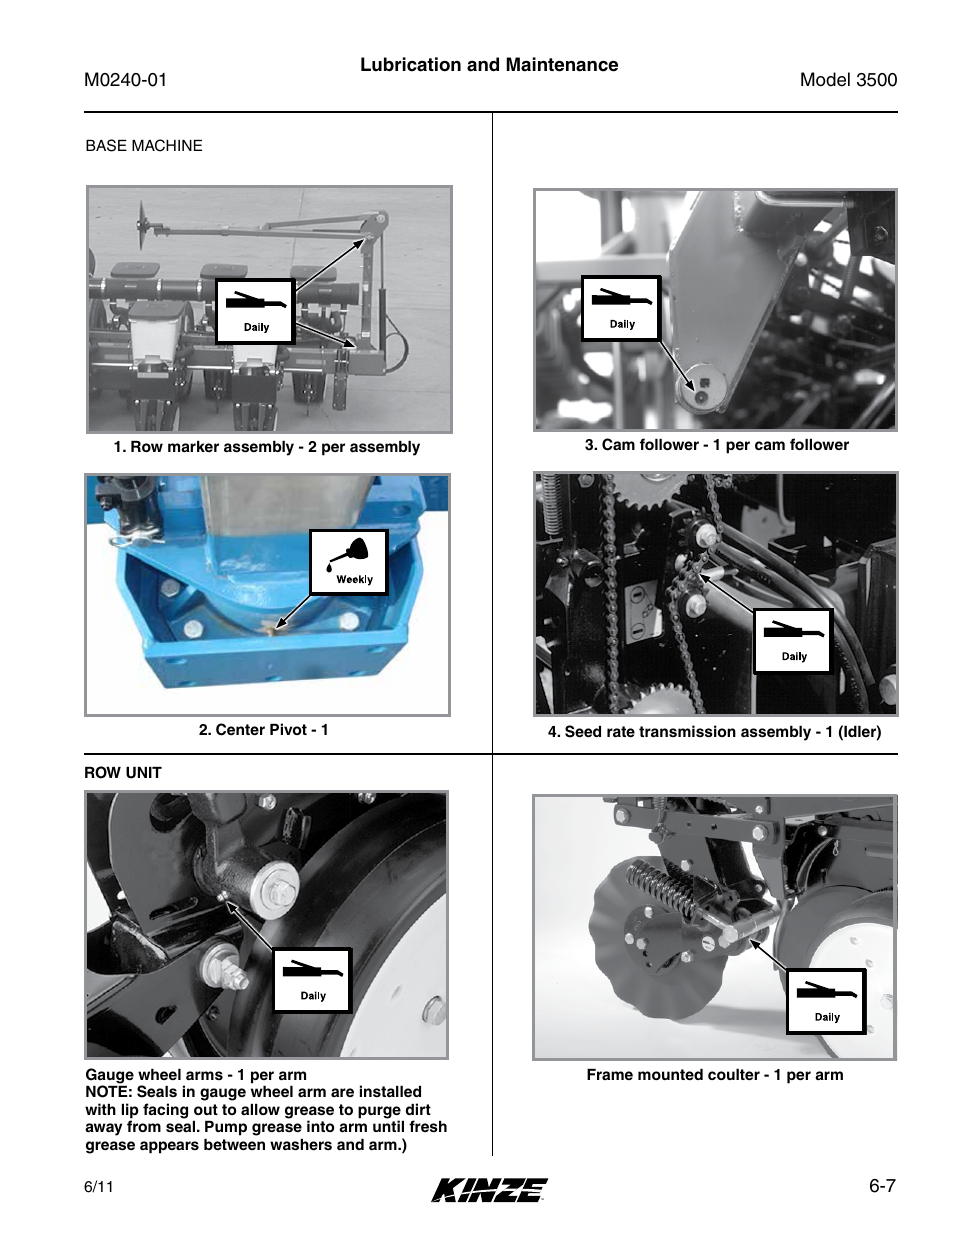 Kinze 3500 Lift and Rotate Planter Rev. 7/14 User Manual | Page 103 / 140